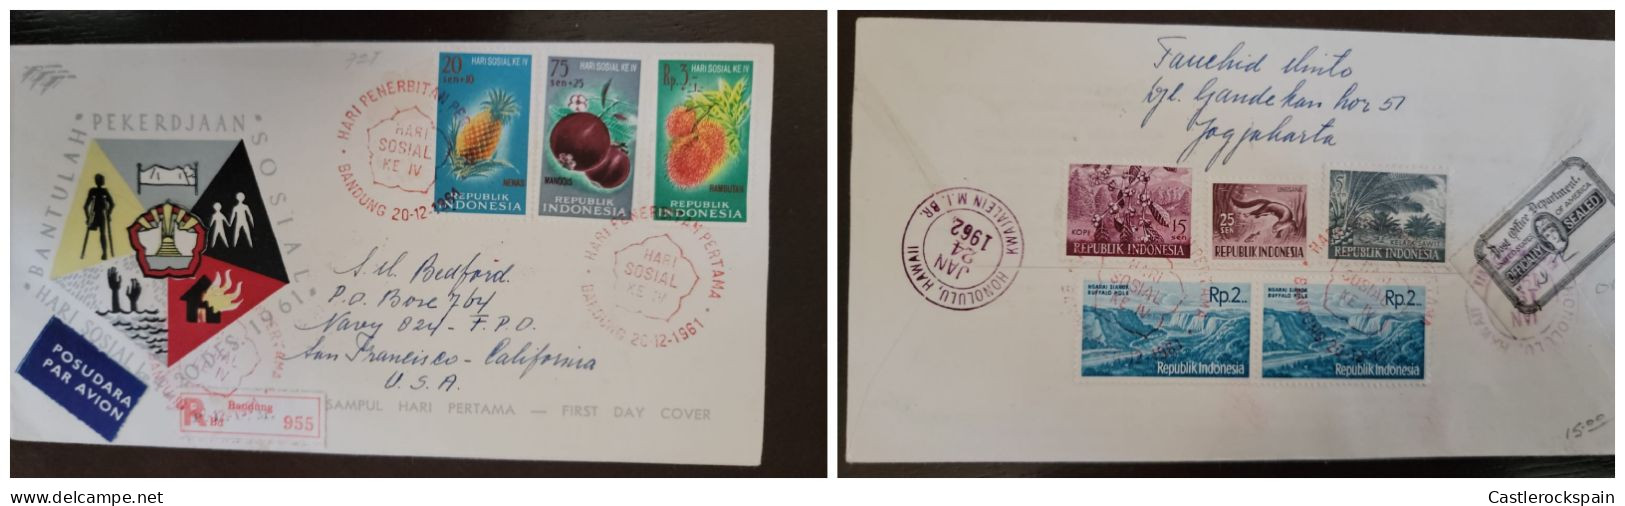 O) 1962 INDONESIA, OFFICIALLY SEALED,  POST OFFICE DEPARTMENT, EXOTIC FRUITS, COFFEE,OIL PALMS,  BUFFALO HOLE - FOR TOUR - Indonesia